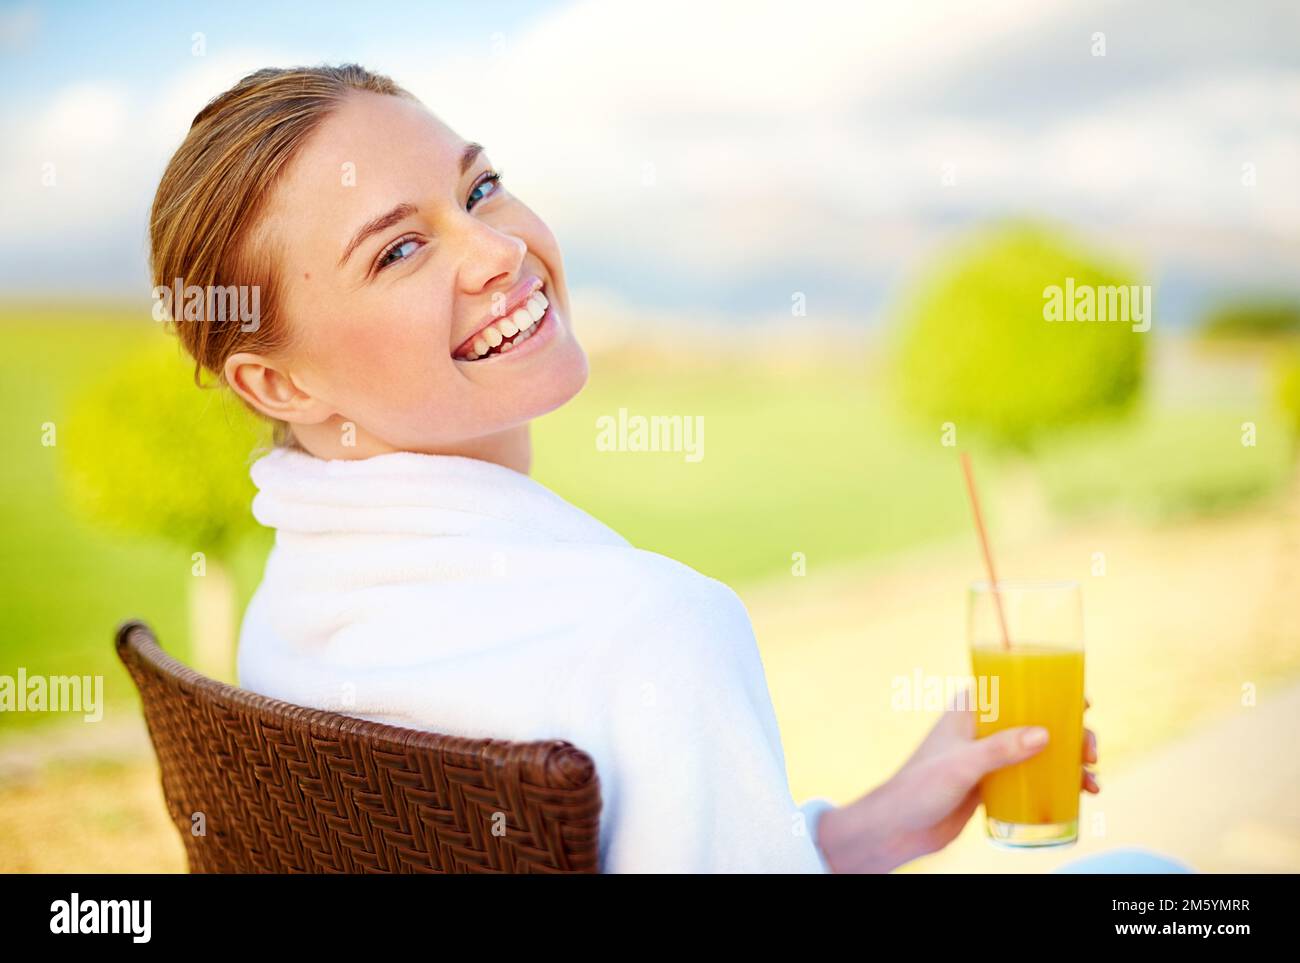 Treating myself to a weekend of wellness. Portrait of an attractive young woman enjoying a drink at a spa. Stock Photo